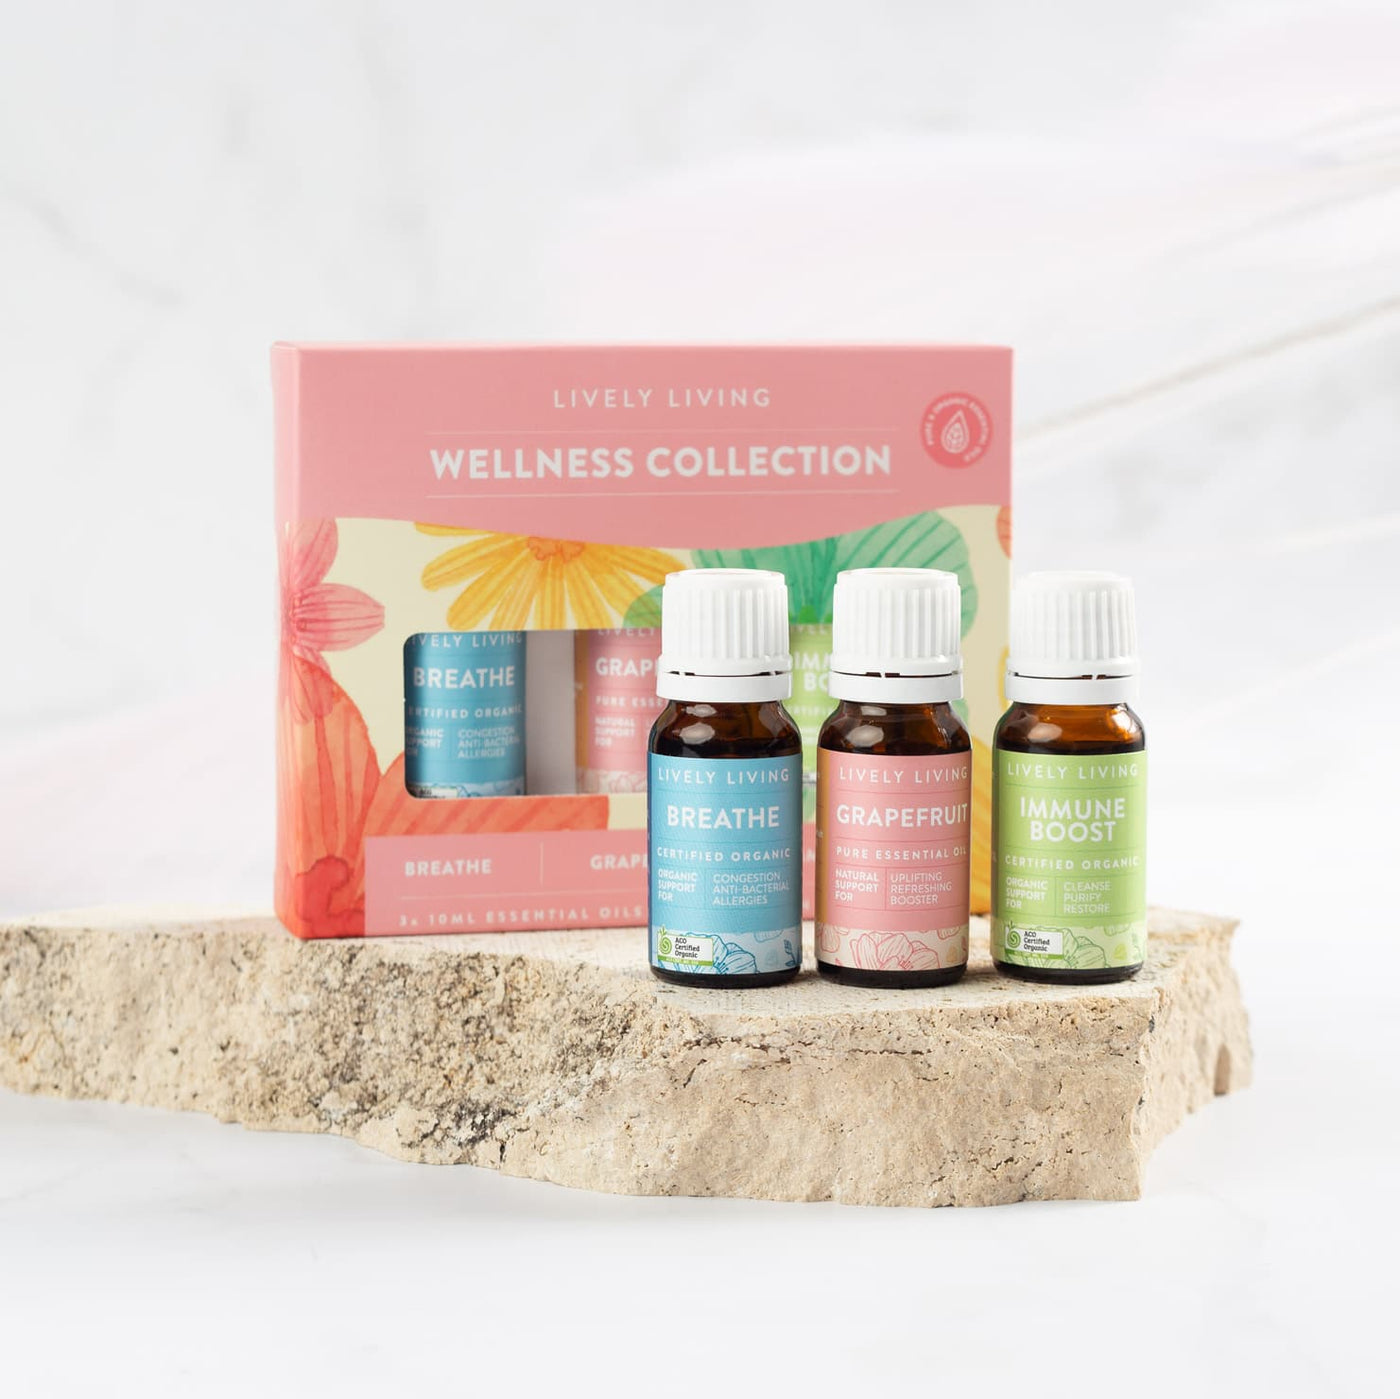 Wellness Collection Trio: Breathe, Immune Boost, and Pink Grapefruit- Top Sellers!